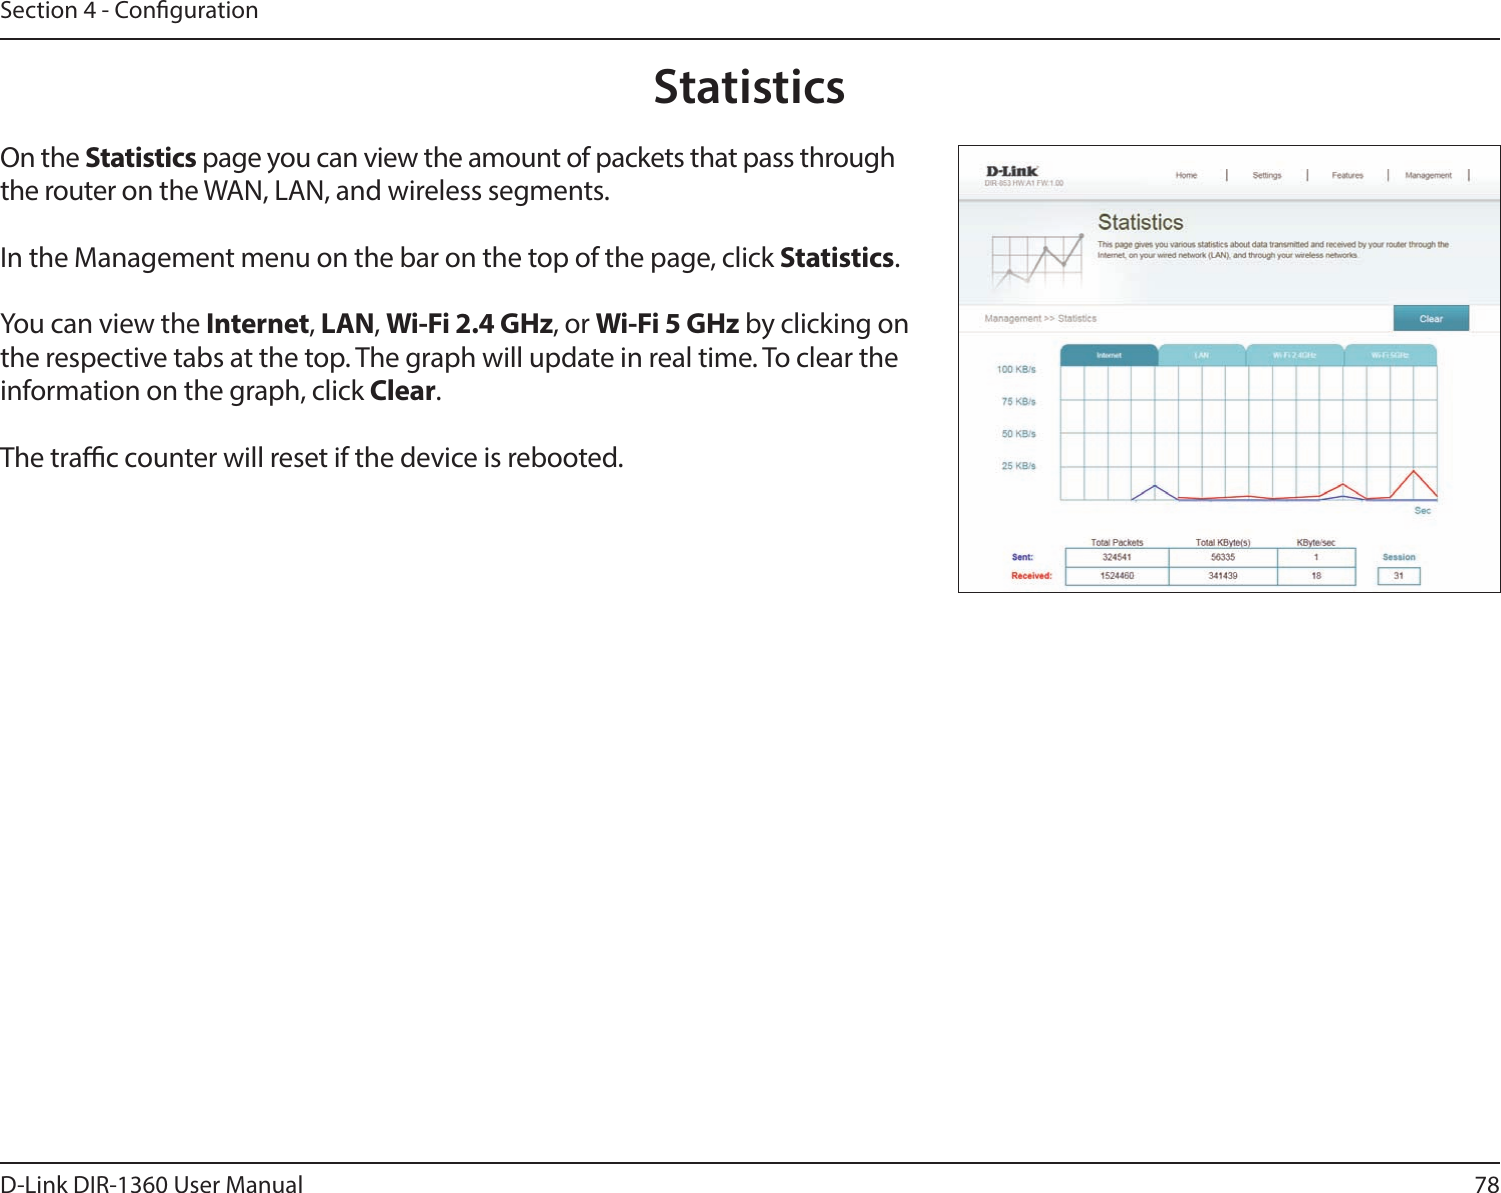 78D-Link DIR-1360 User ManualSection 4 - CongurationStatisticsOn the Statistics page you can view the amount of packets that pass through the router on the WAN, LAN, and wireless segments.In the Management menu on the bar on the top of the page, click Statistics.You can view the Internet, LAN, Wi-Fi 2.4 GHz, or Wi-Fi 5 GHz by clicking on the respective tabs at the top. The graph will update in real time. To clear the information on the graph, click Clear.The trac counter will reset if the device is rebooted.